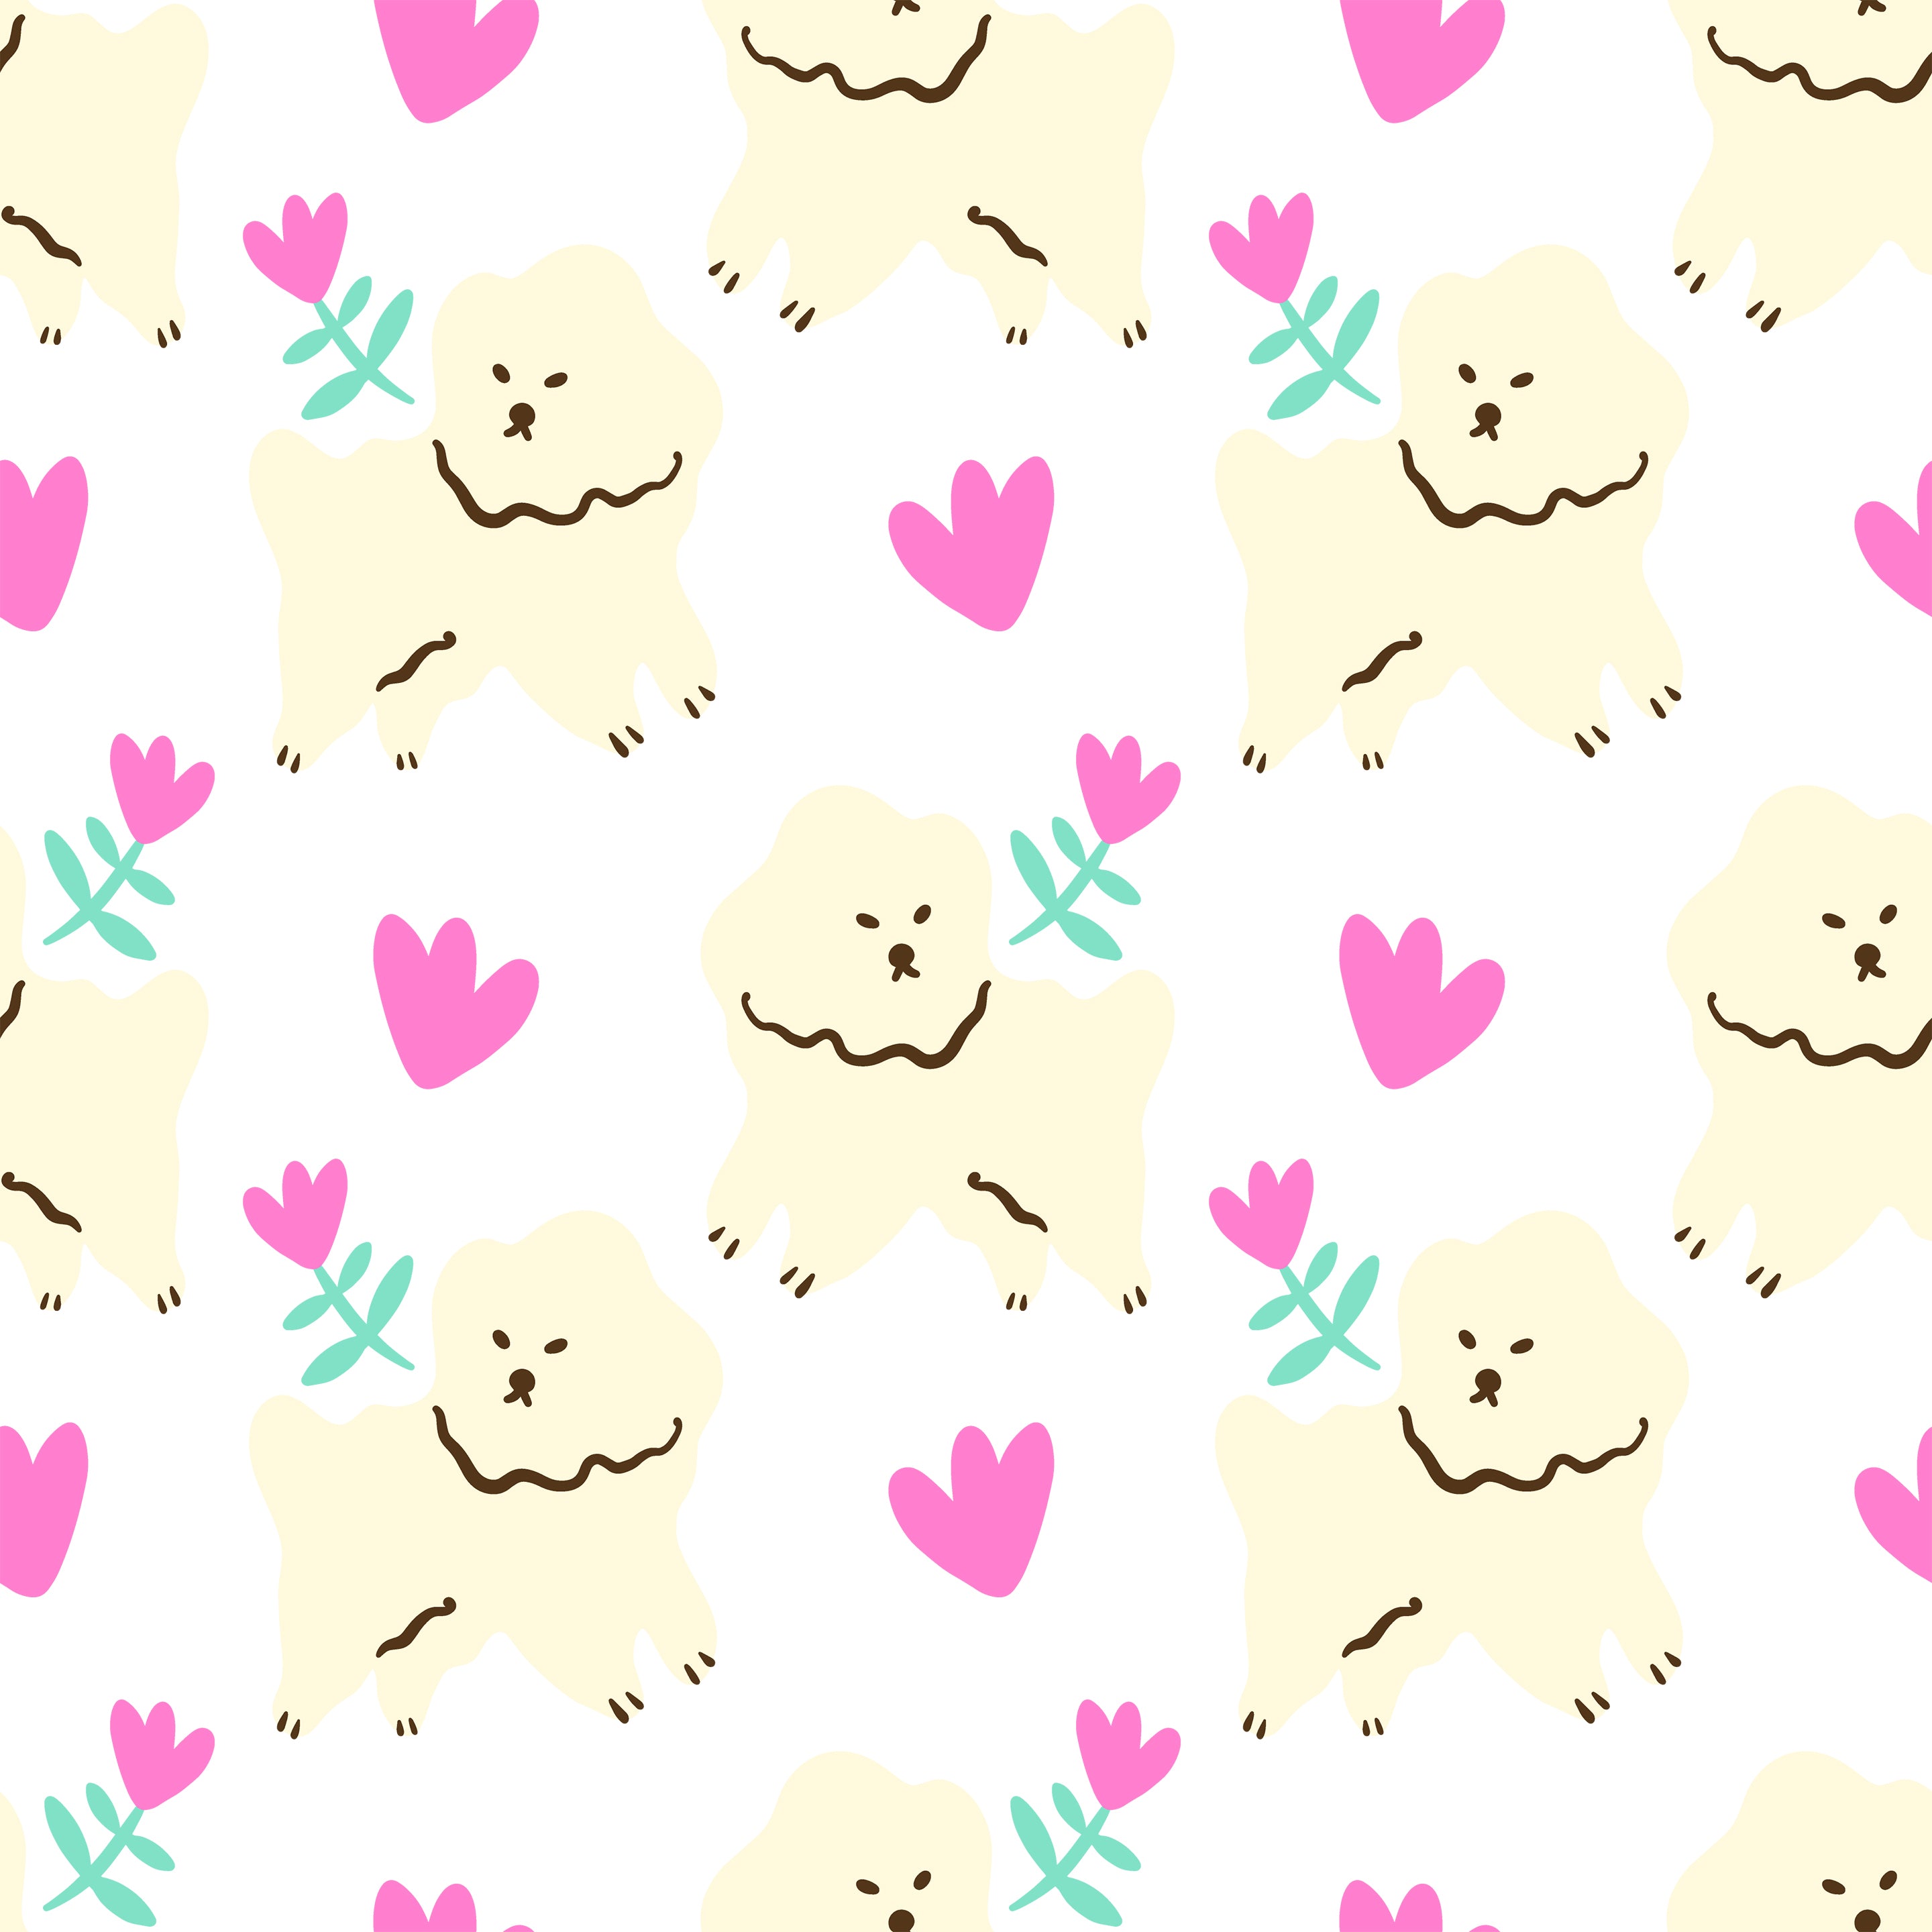 Adorable wallpaper pattern from 'Dog Wallpaper 39' featuring cream-colored fluffy dogs surrounded by pink hearts and teal flowers on a white background. This design is perfect for adding a warm and cheerful touch to any room, especially suitable for children's rooms or nurseries.